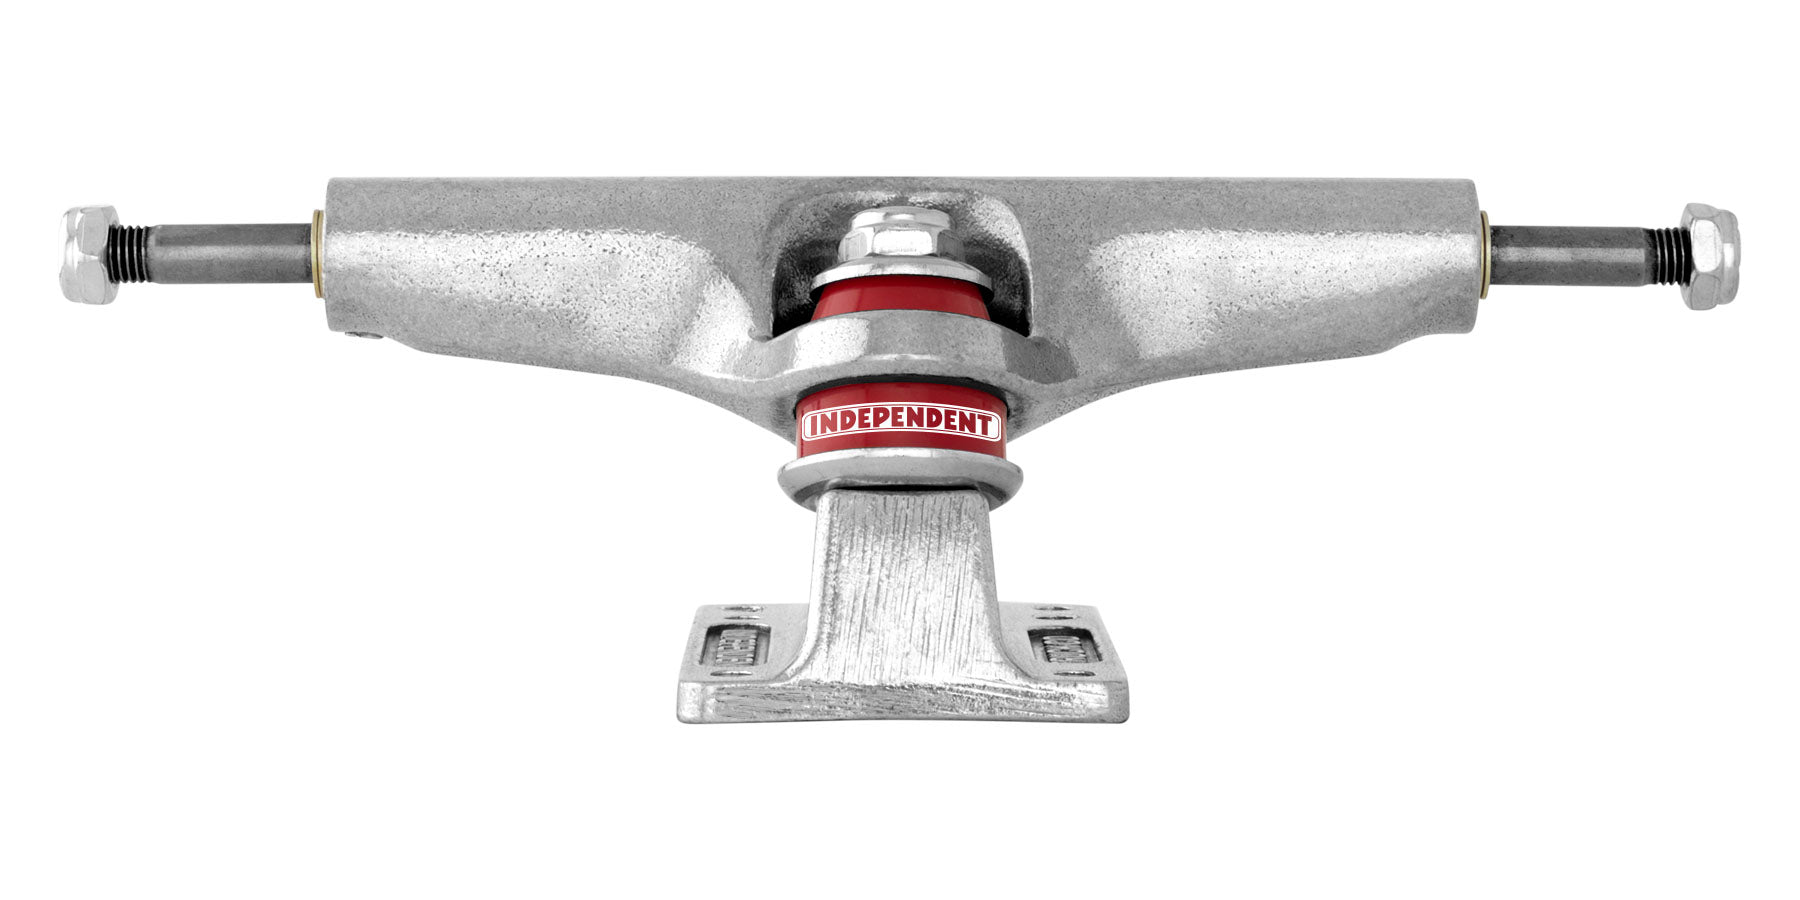 Independent Stage 4 Skateboard Trucks Re-Issue - Invisible Board Shop